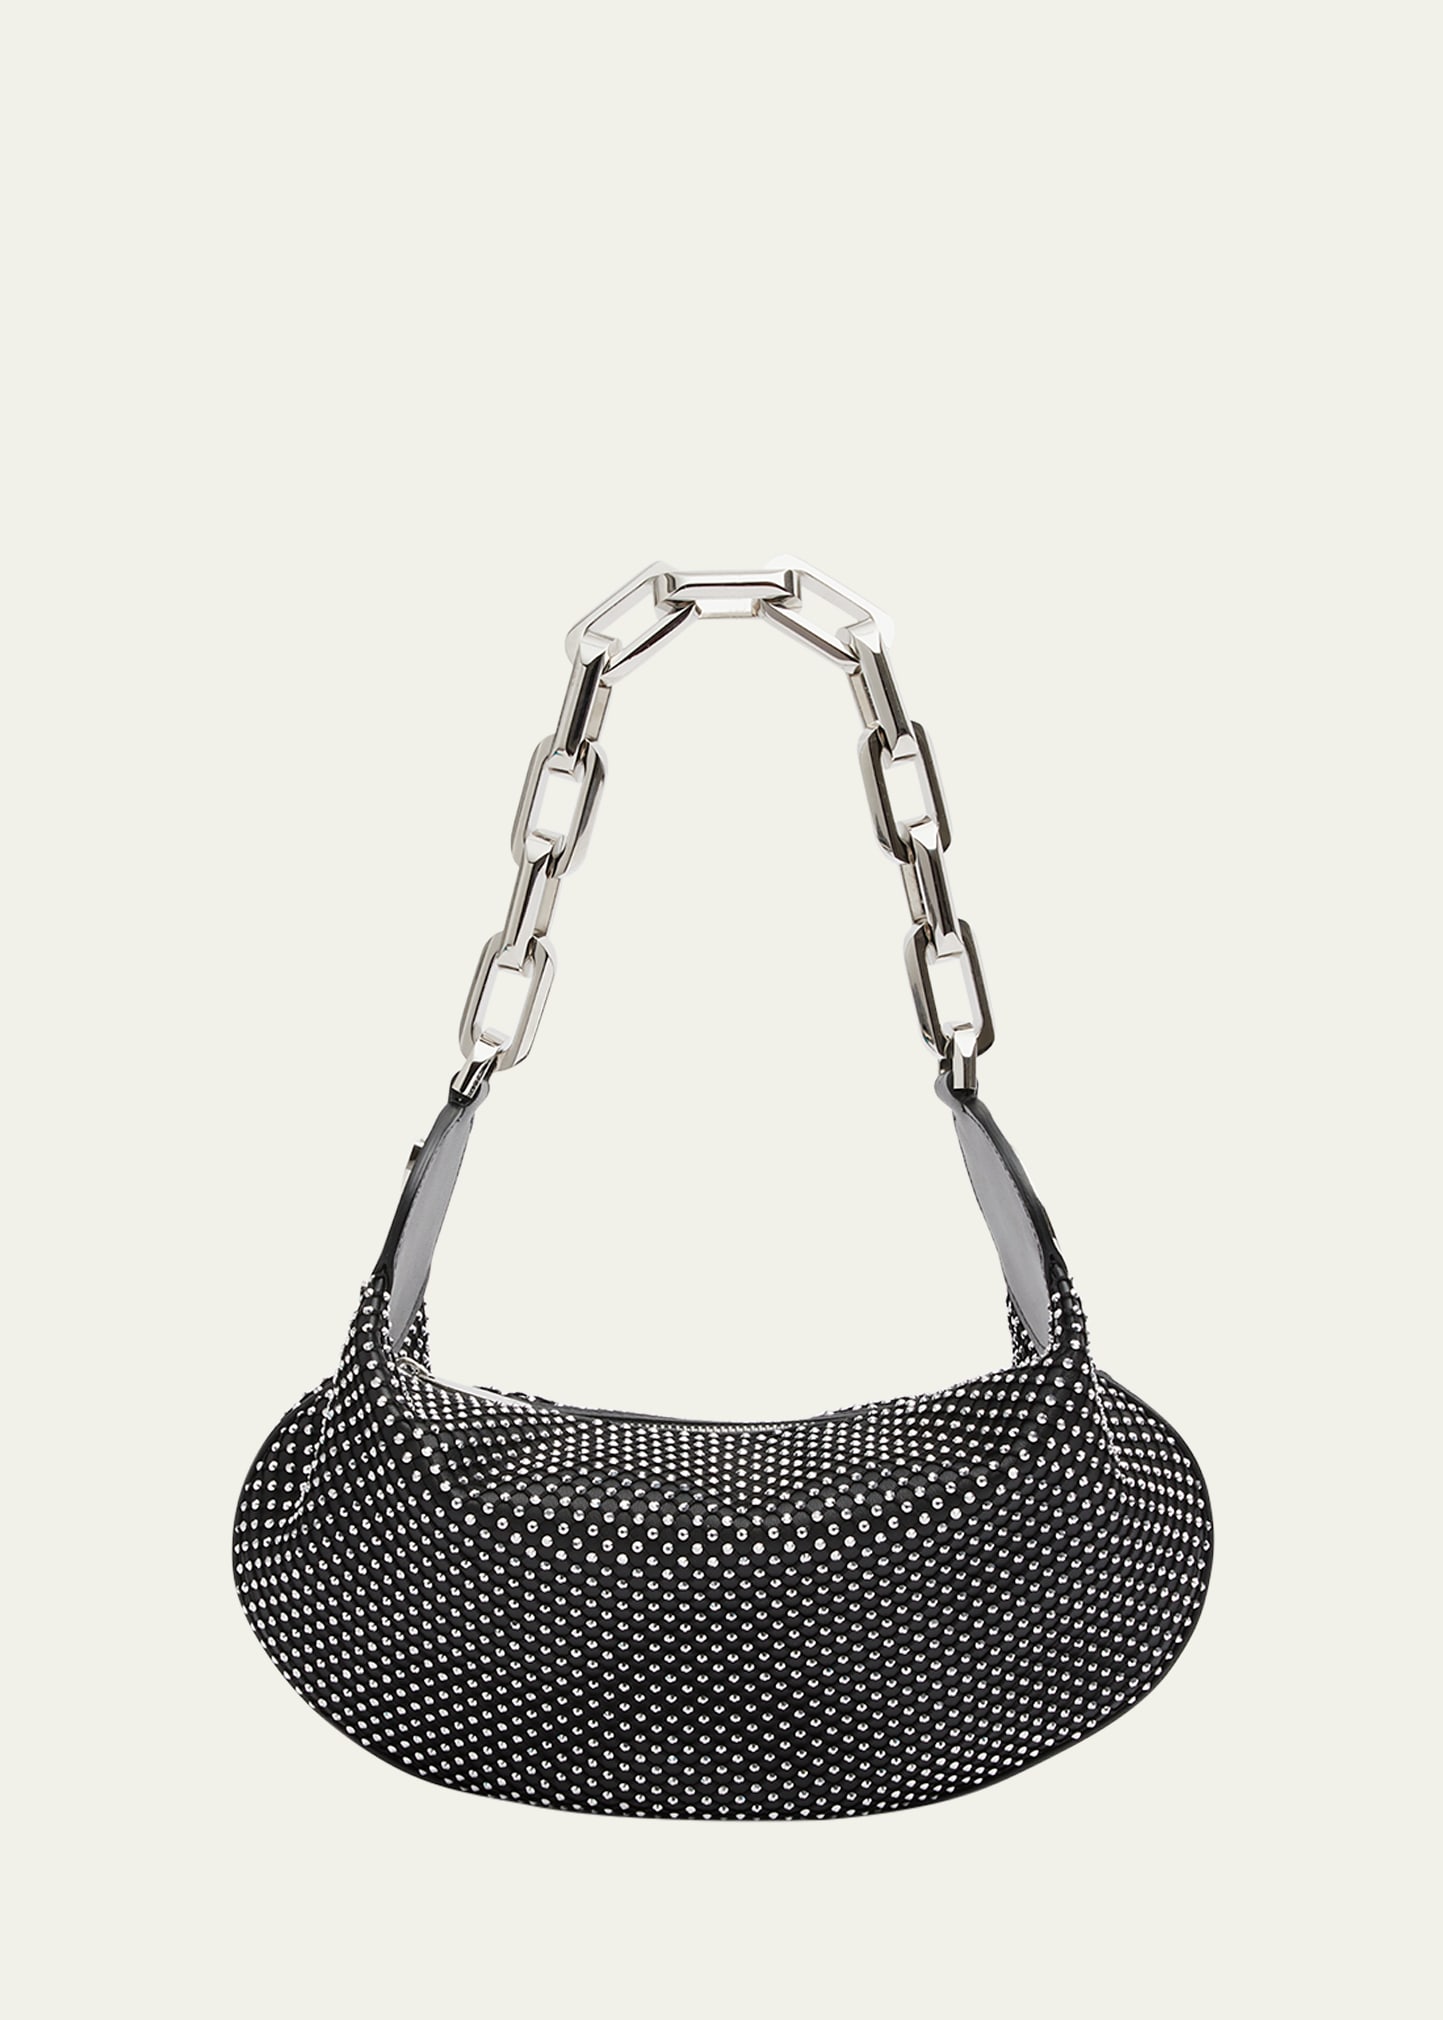 Le 54 Chain Shoulder Bag in Strass Netting Nappa